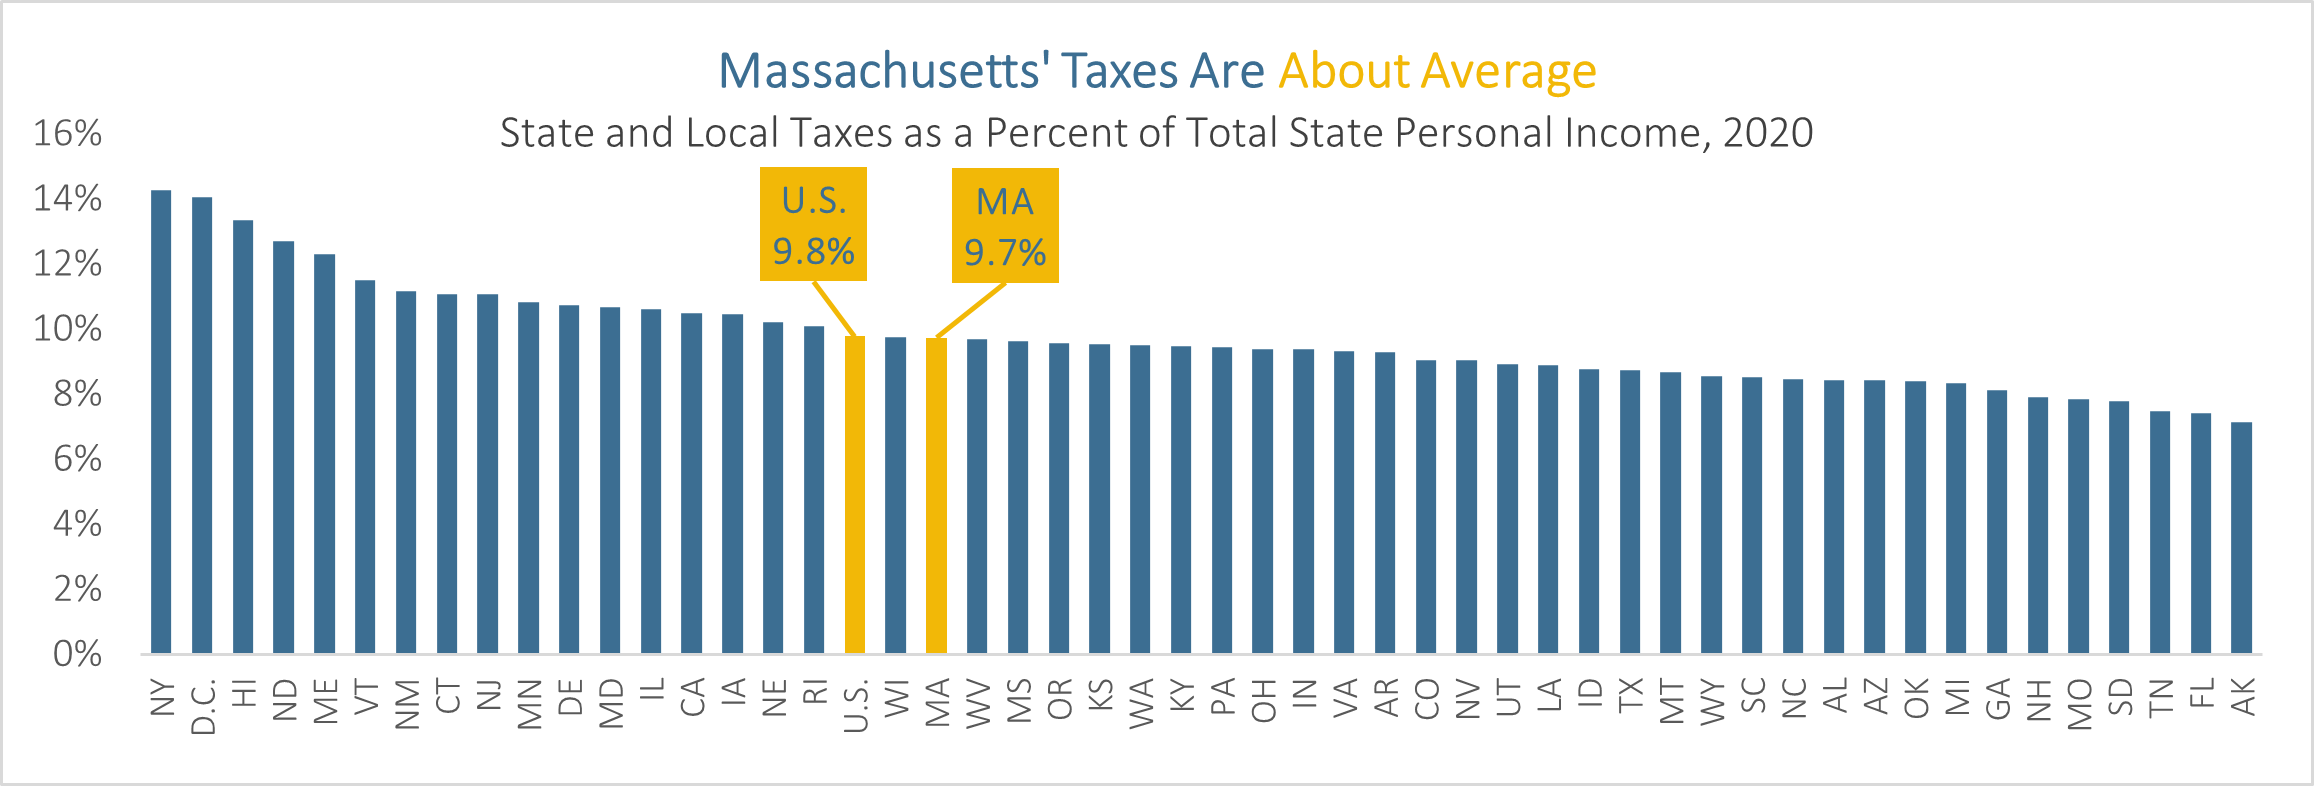 Massachusetts Taxes Are About Average - State and Local Taxes as a Percent of Total State Personal Income, 2020. MA is at 9.7% compared to the U.S. average of 9.8%